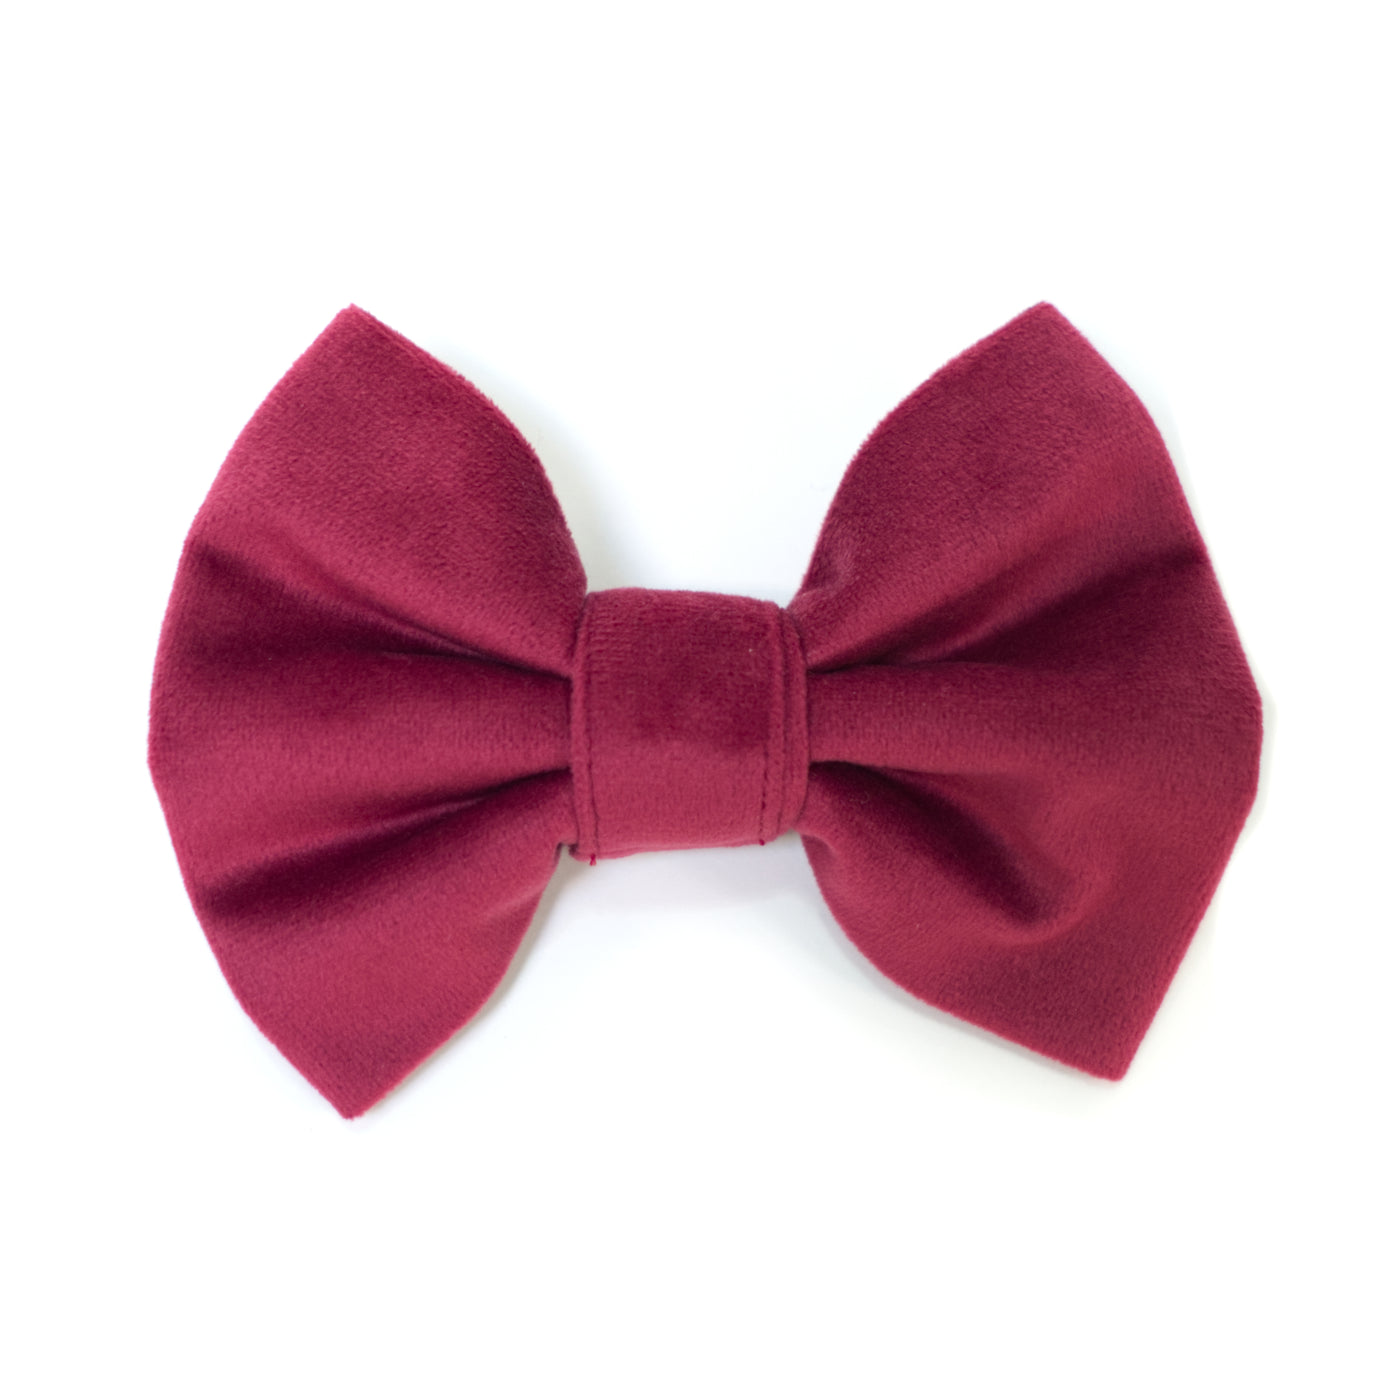 Wine velvet classic dog bow tie for collars and harnesses